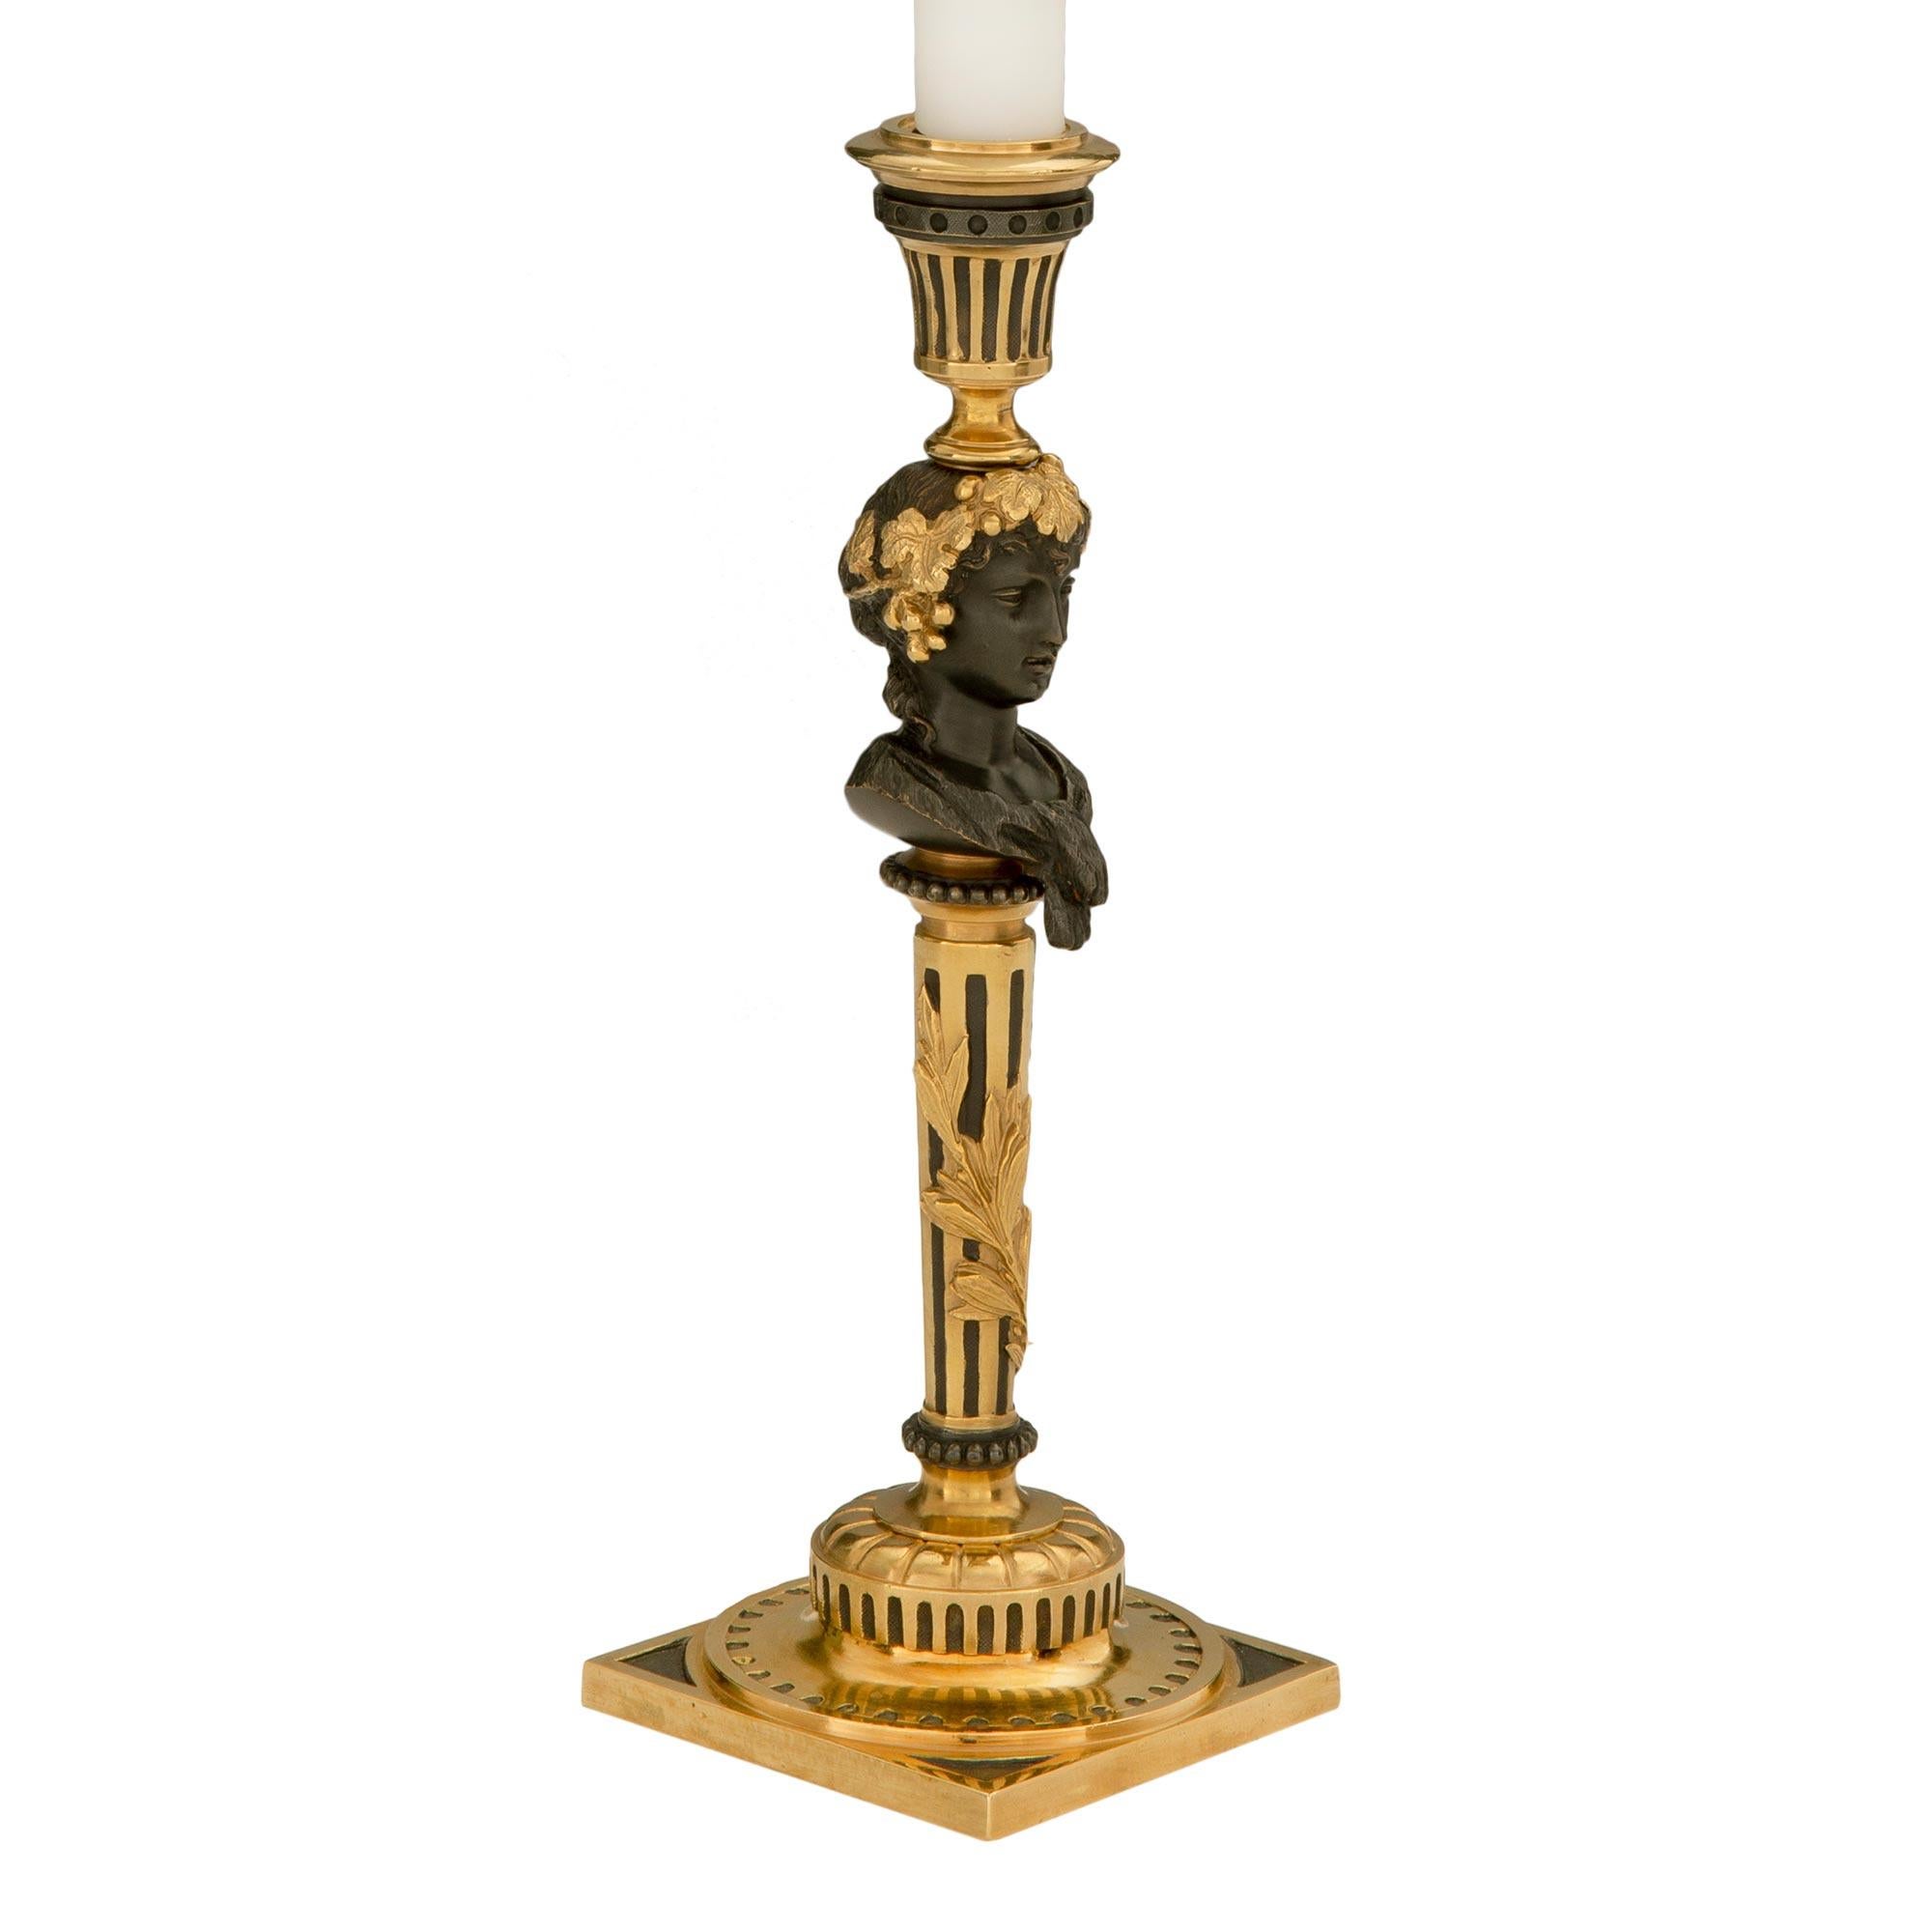 A most elegant pair of French 19th century Louis XVI st. ormolu and patinated bronze electrified candlestick lamps. Each lamp is raised by a square base in a unique and most decorative ormolu and patinated bronze design. The circular tapered